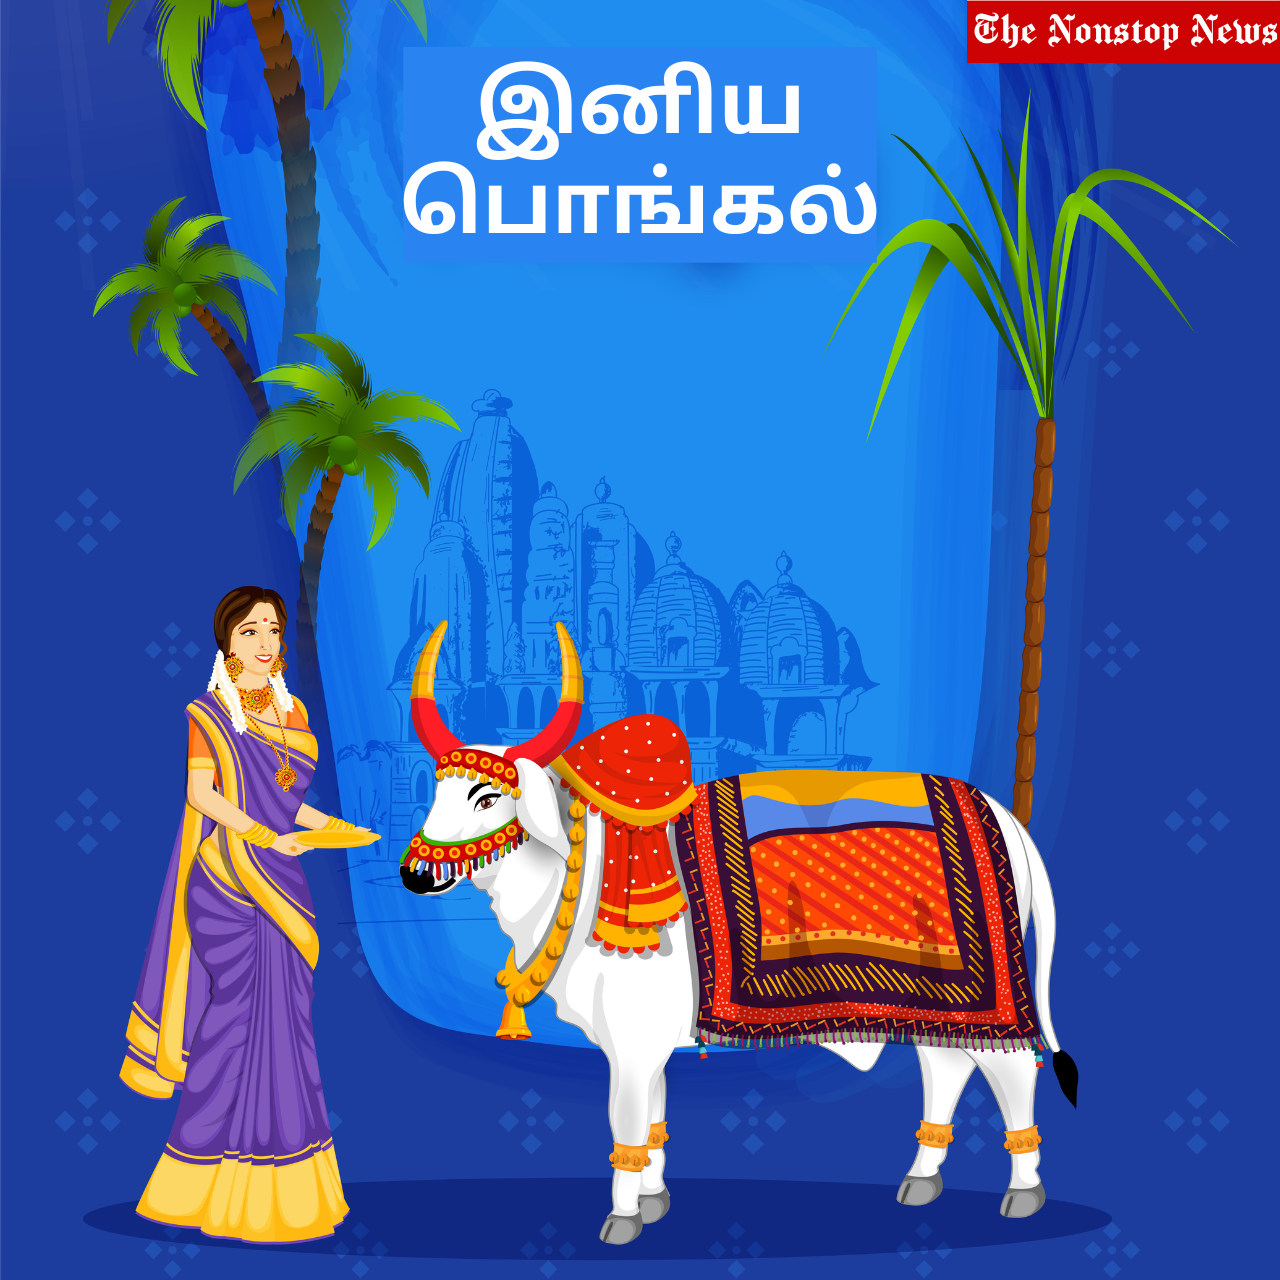 Happy Pongal 2023 Wishes in Tamil, Quotes, Messages, Greetings, Images Posters, SMS, Banners, and Facebook Status